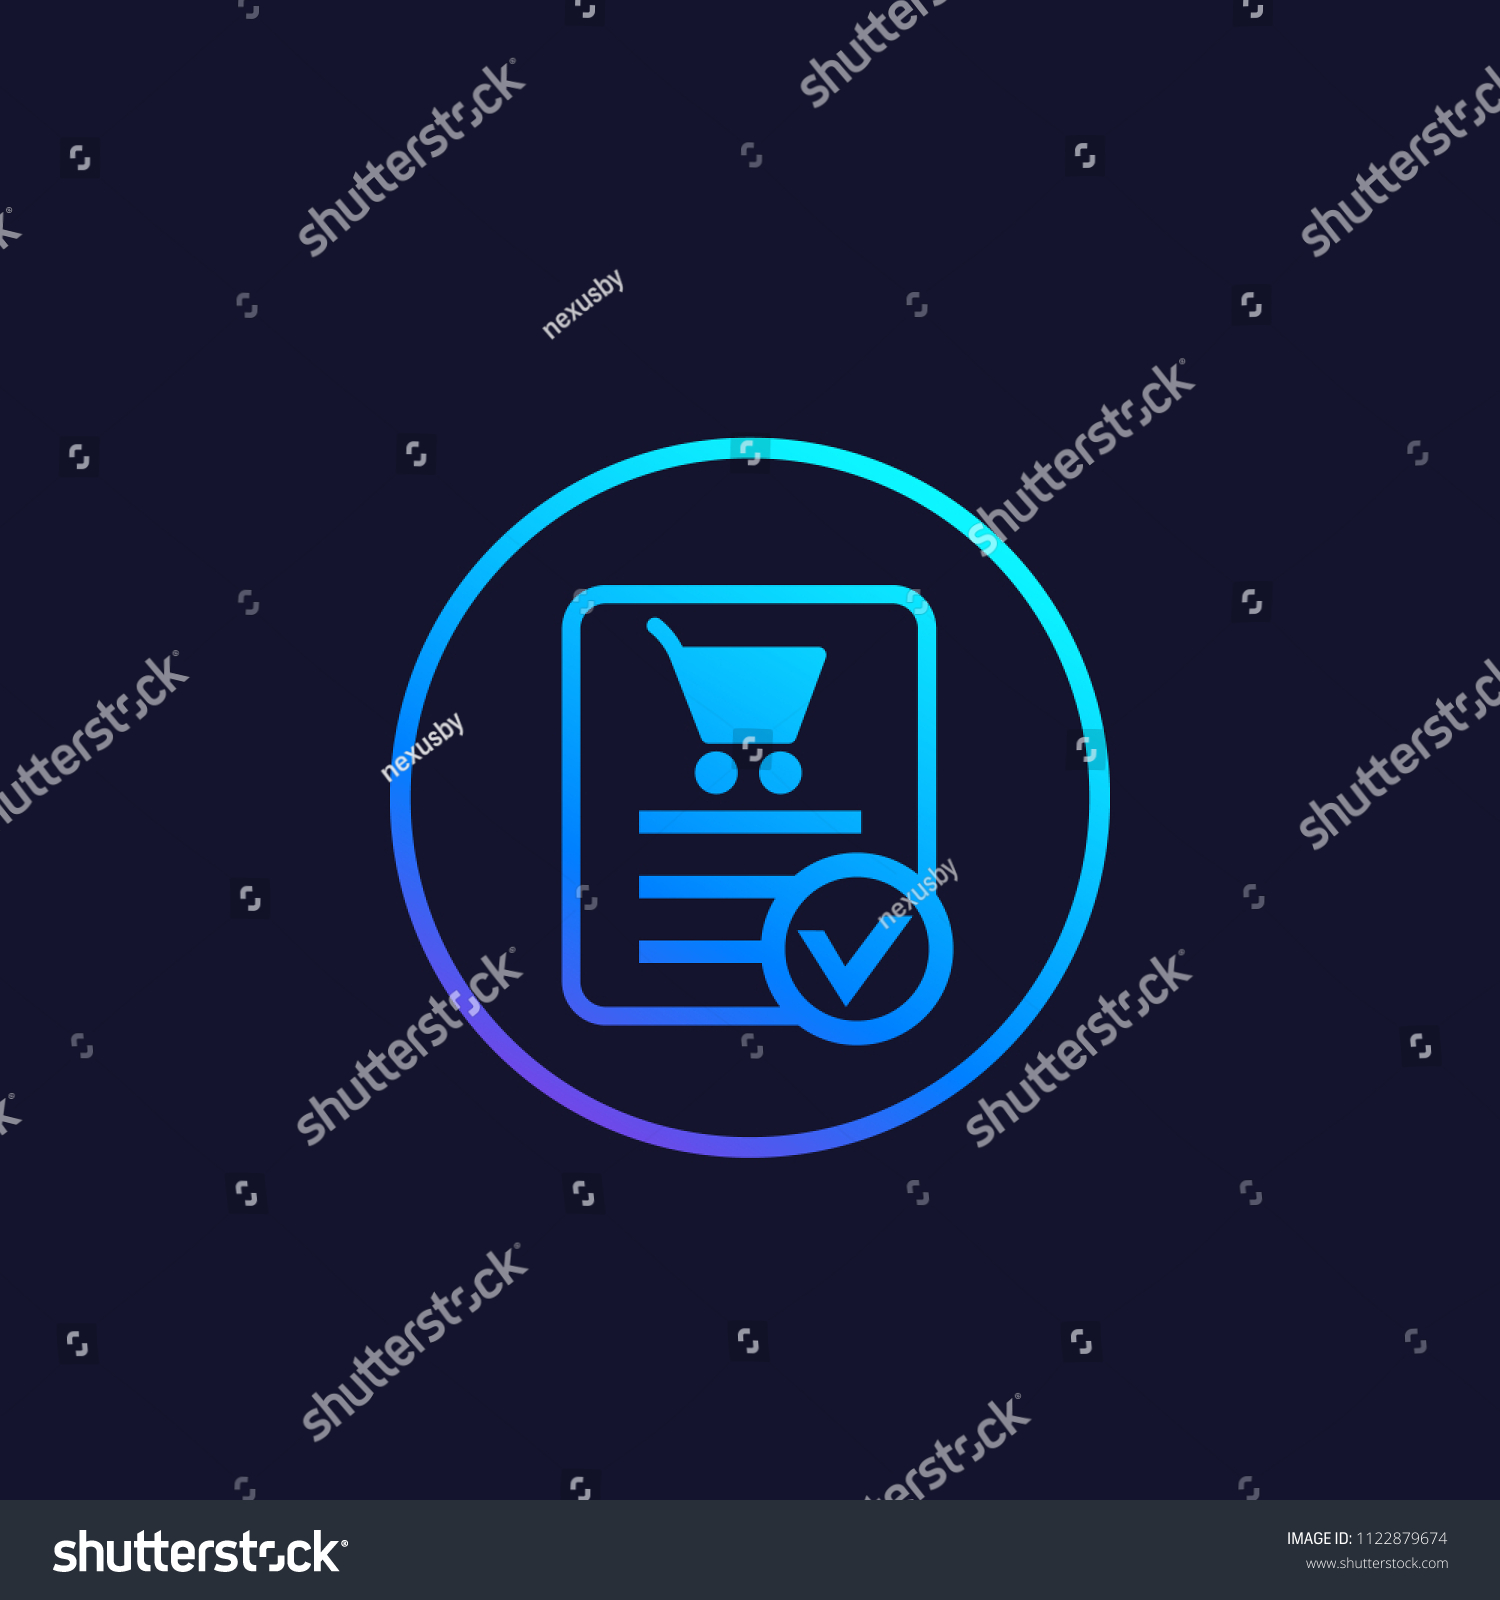 SVG of online order, purchase completed vector icon svg